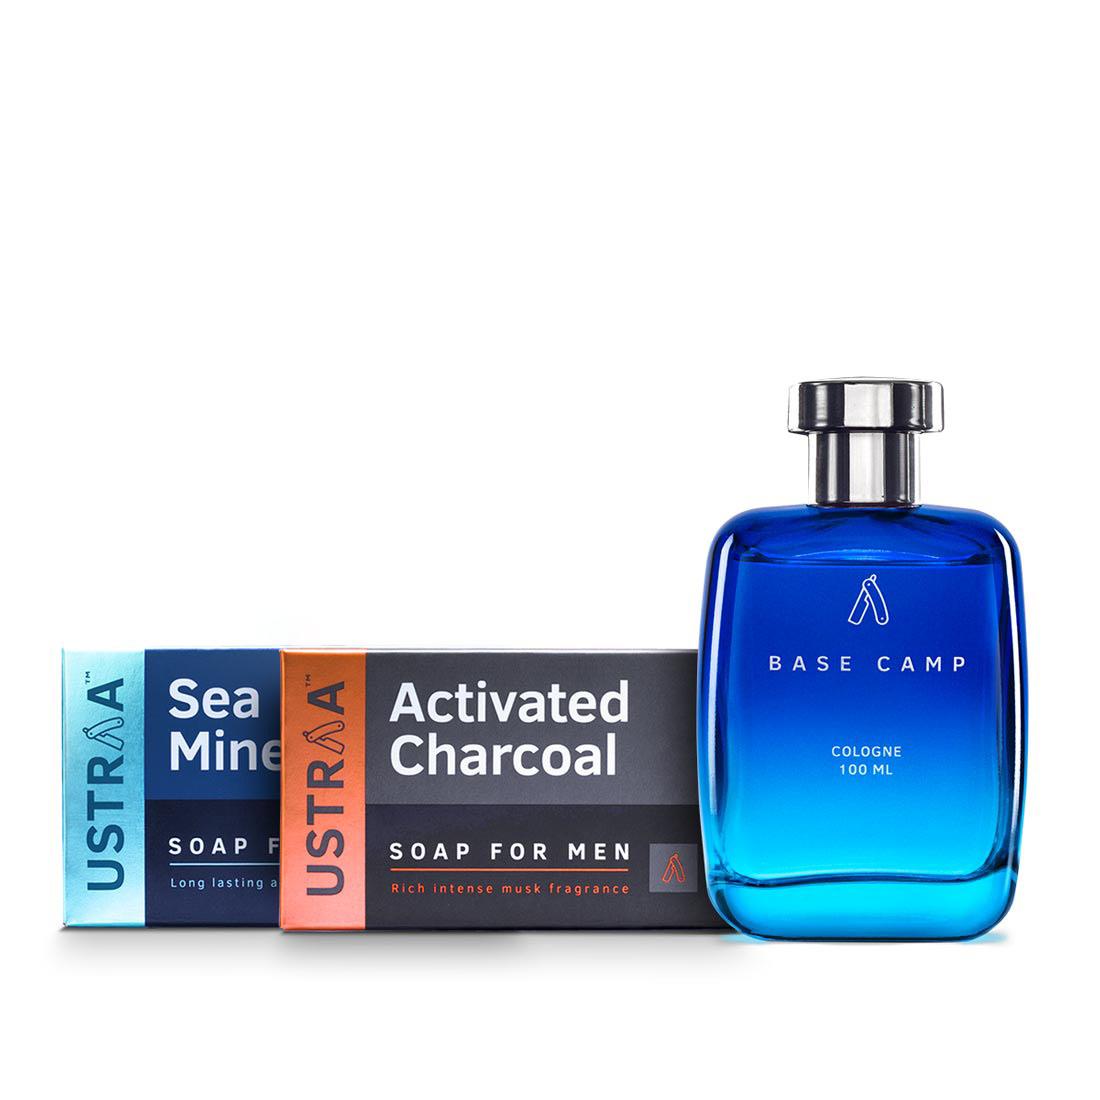 Base Camp Cologne - Perfume for Men & Deo Activated Charcoal and Deo Soap Sea Minerals Soaps